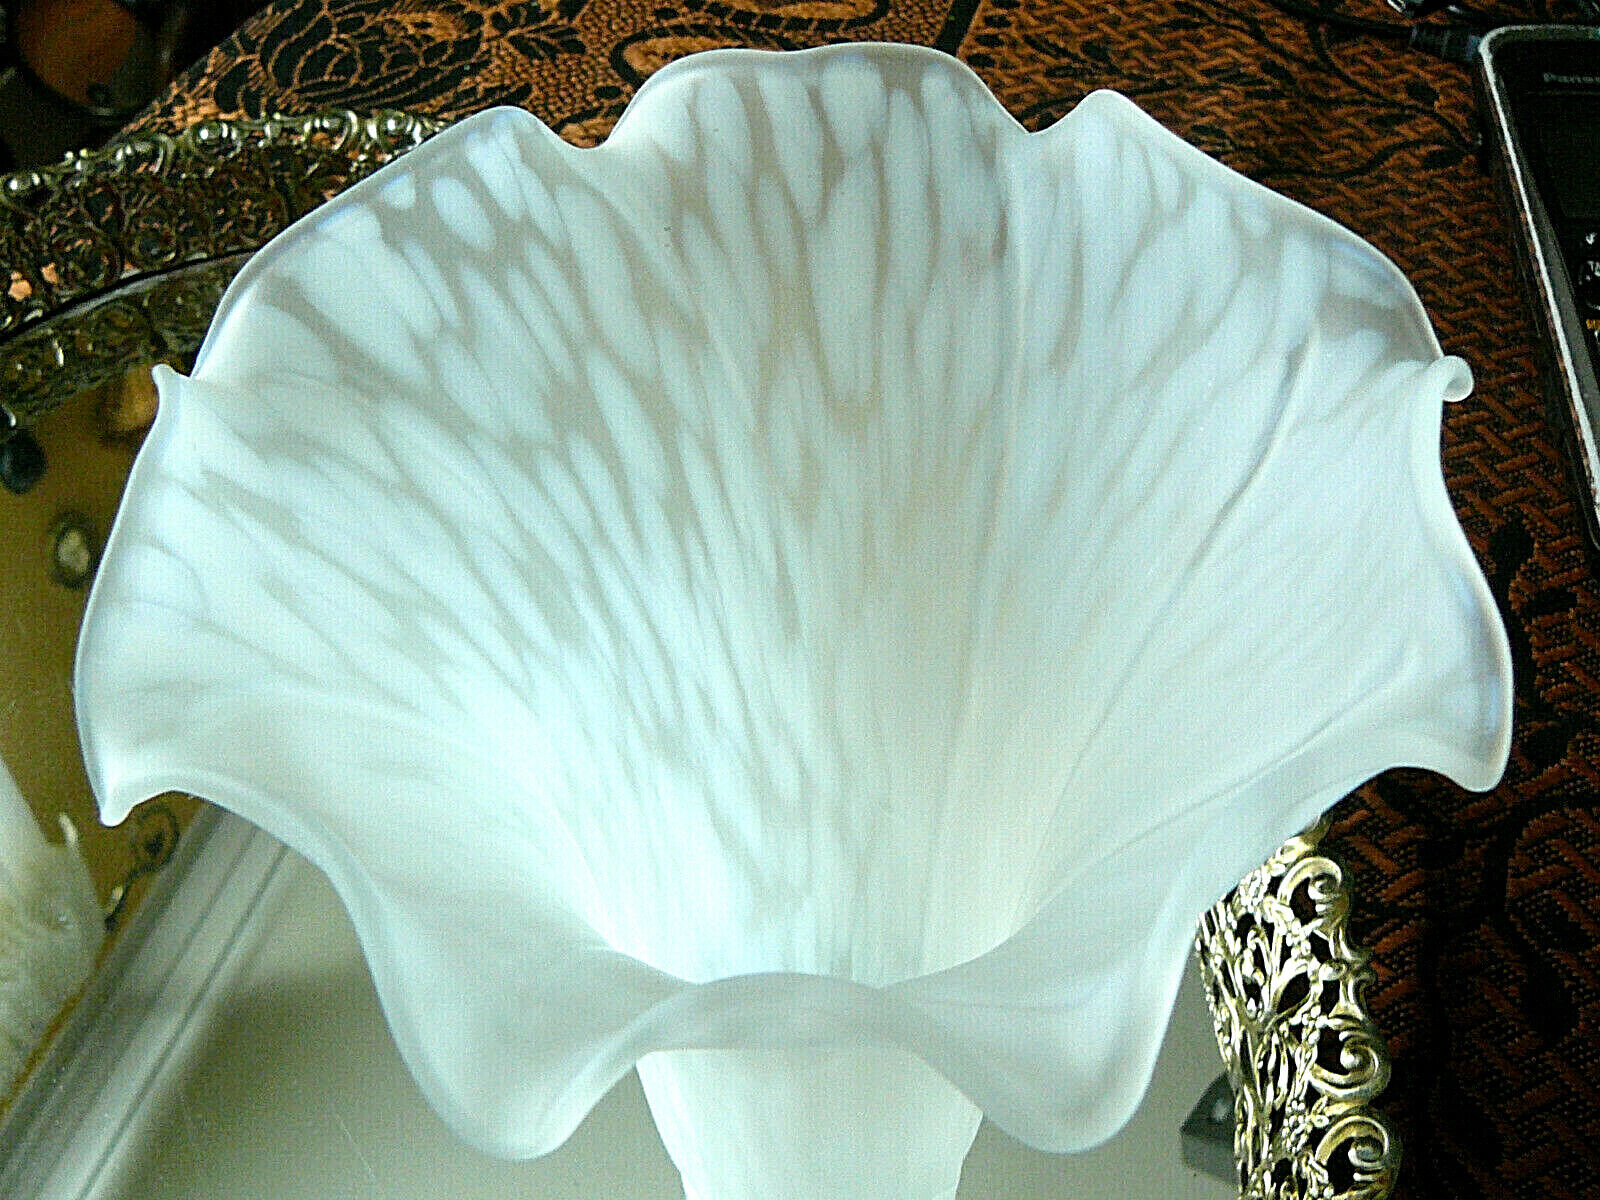 Superb Tiffany Style/Art Nouveau White Frosted Glass Lily Ruffle Lamp Shades 4